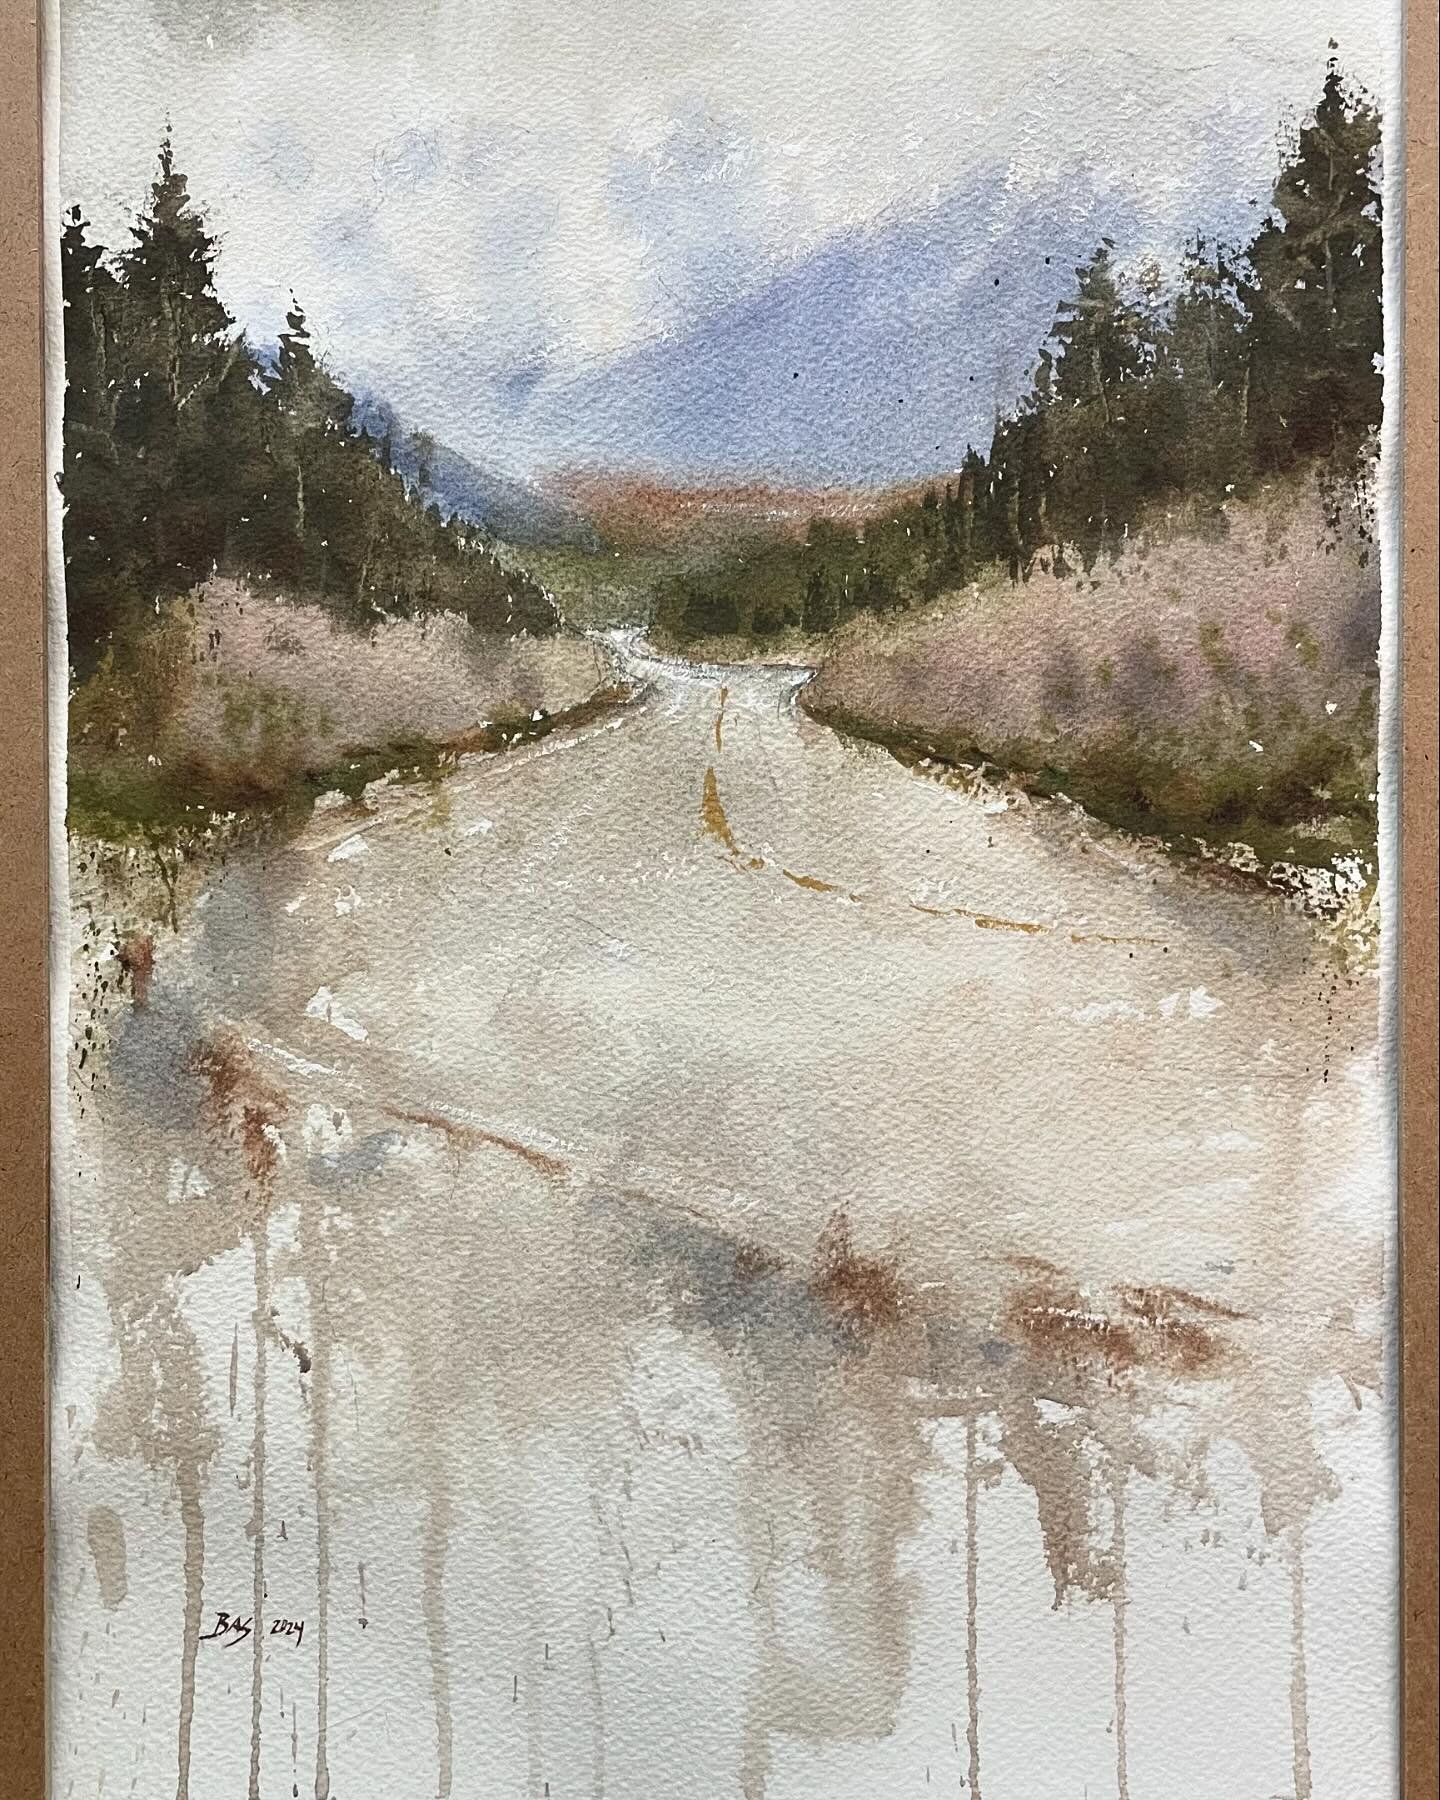 This painting is twice the size of all my other paintings I&rsquo;ve posted. I was experimenting about a month or two ago and had fun with this one. 

Scene from Alaska - Seward Highway. One of the most scenic highways probably in the US.